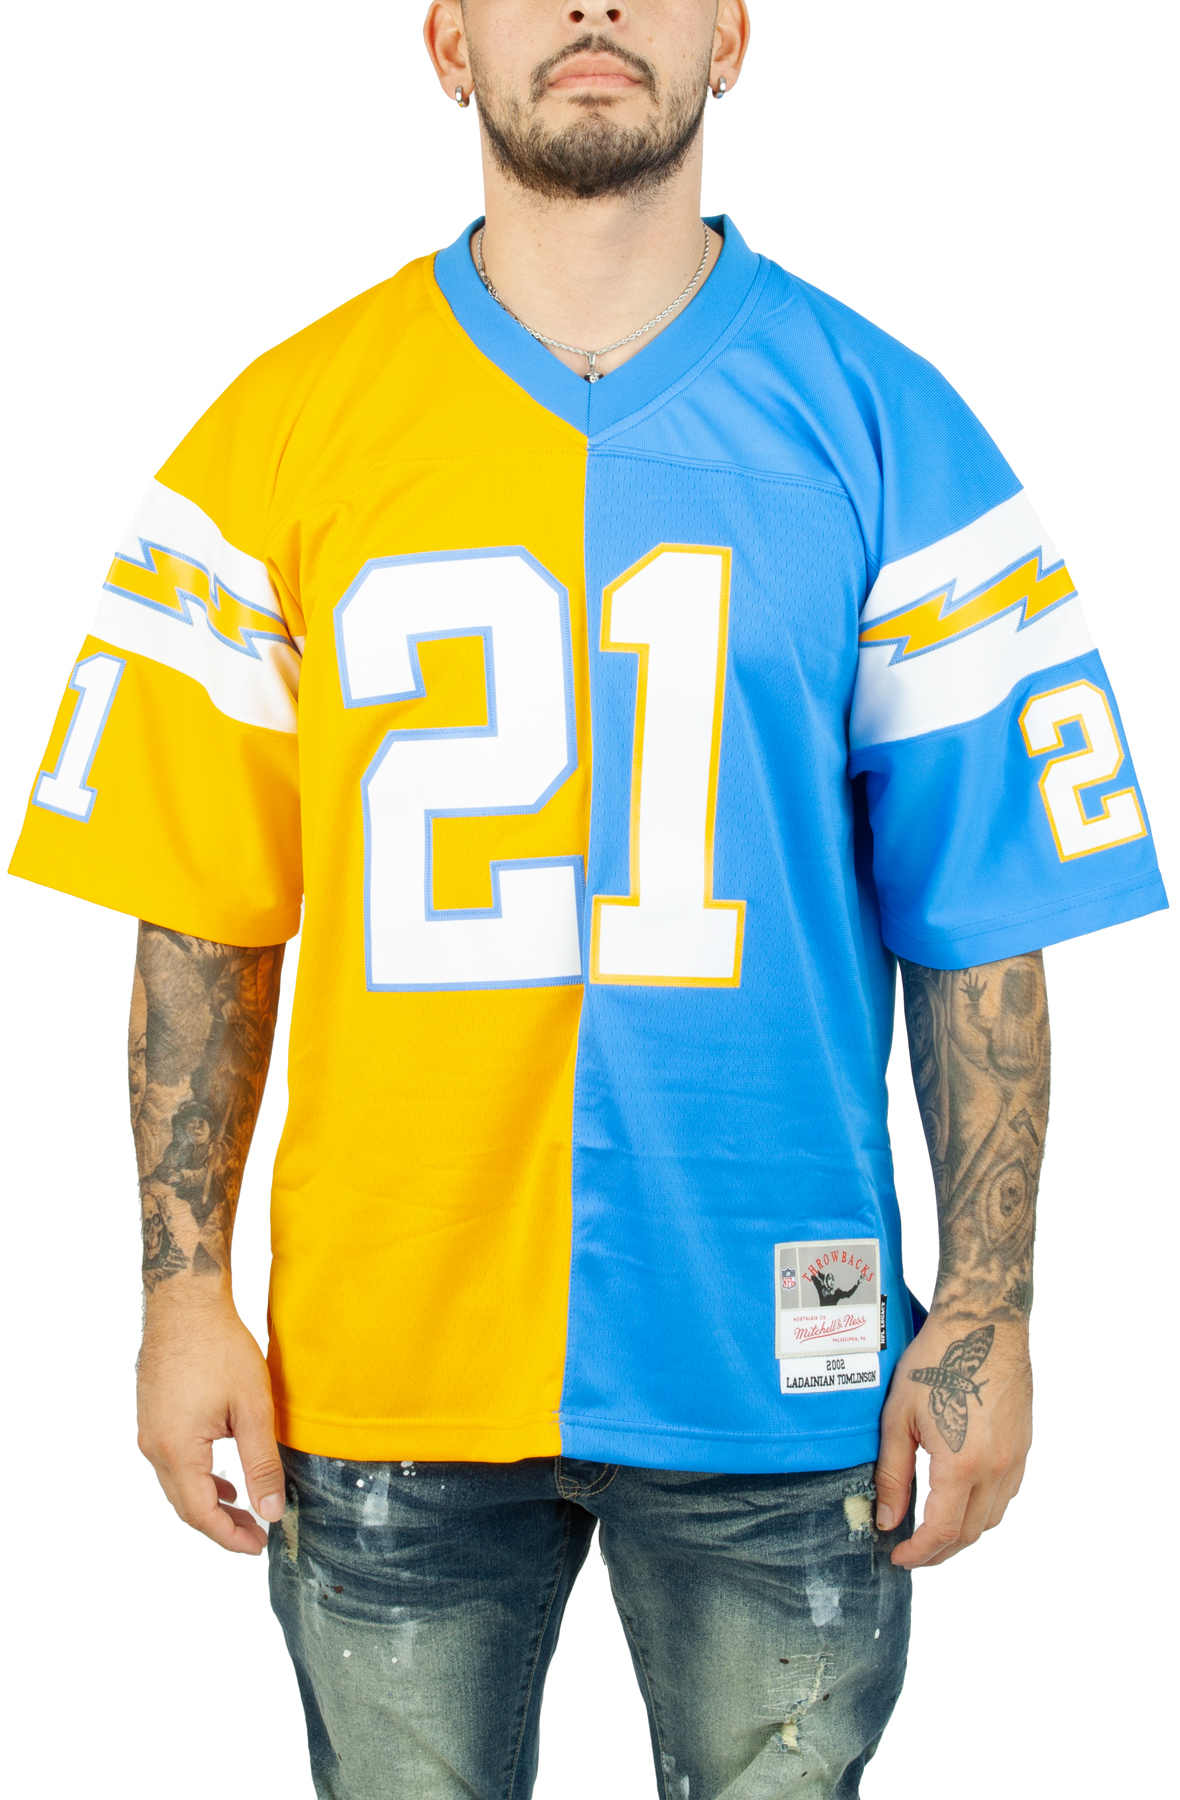 Youth #21 LaDainian Tomlinson LA Chargers Jersey 